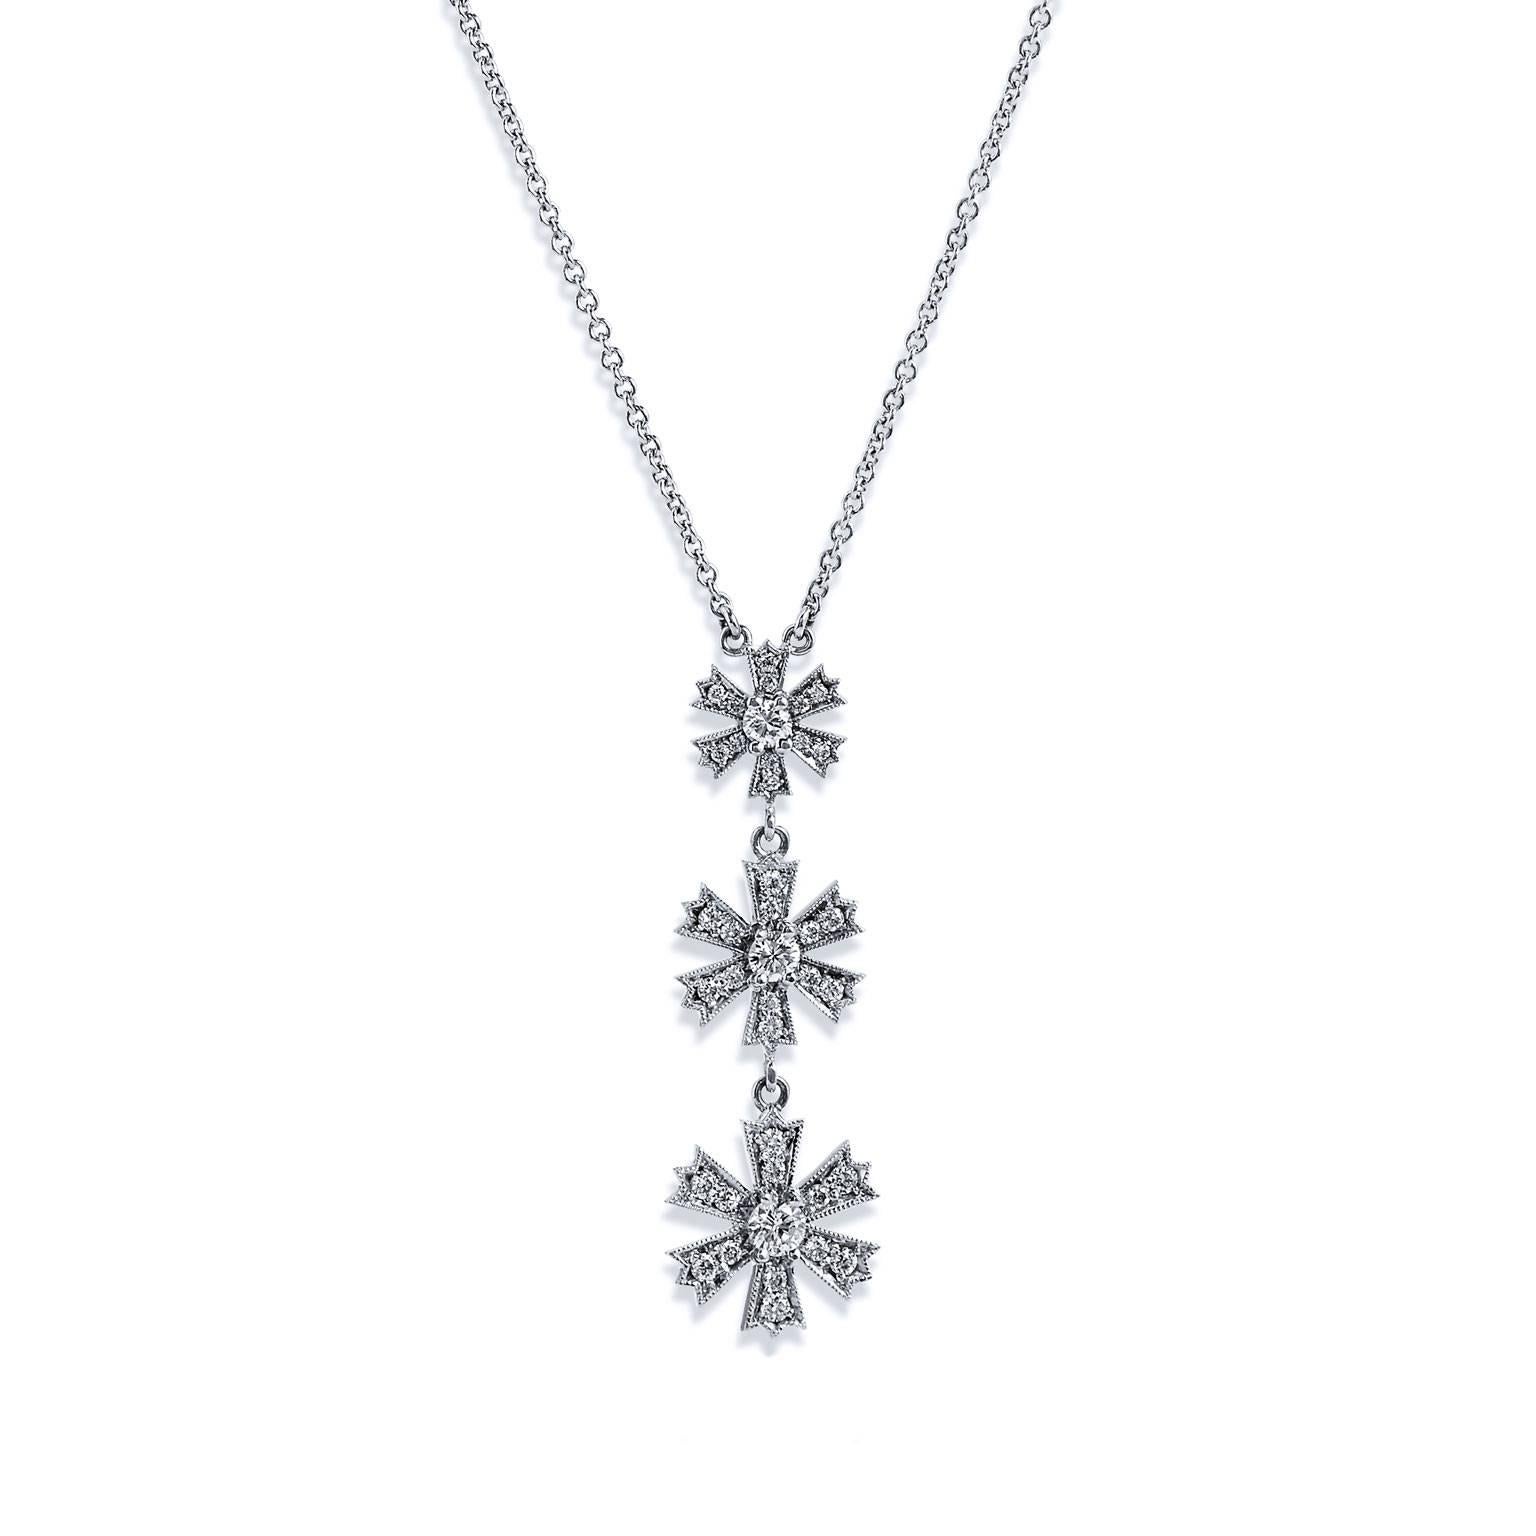 This H and H original necklace is hand-crafted in 18 karat white gold and features four flowers in varying sizes with a total weight of 0.90 carat in linear display (G/H/VS). Each flower reflects a round diamond in prong setting at center with